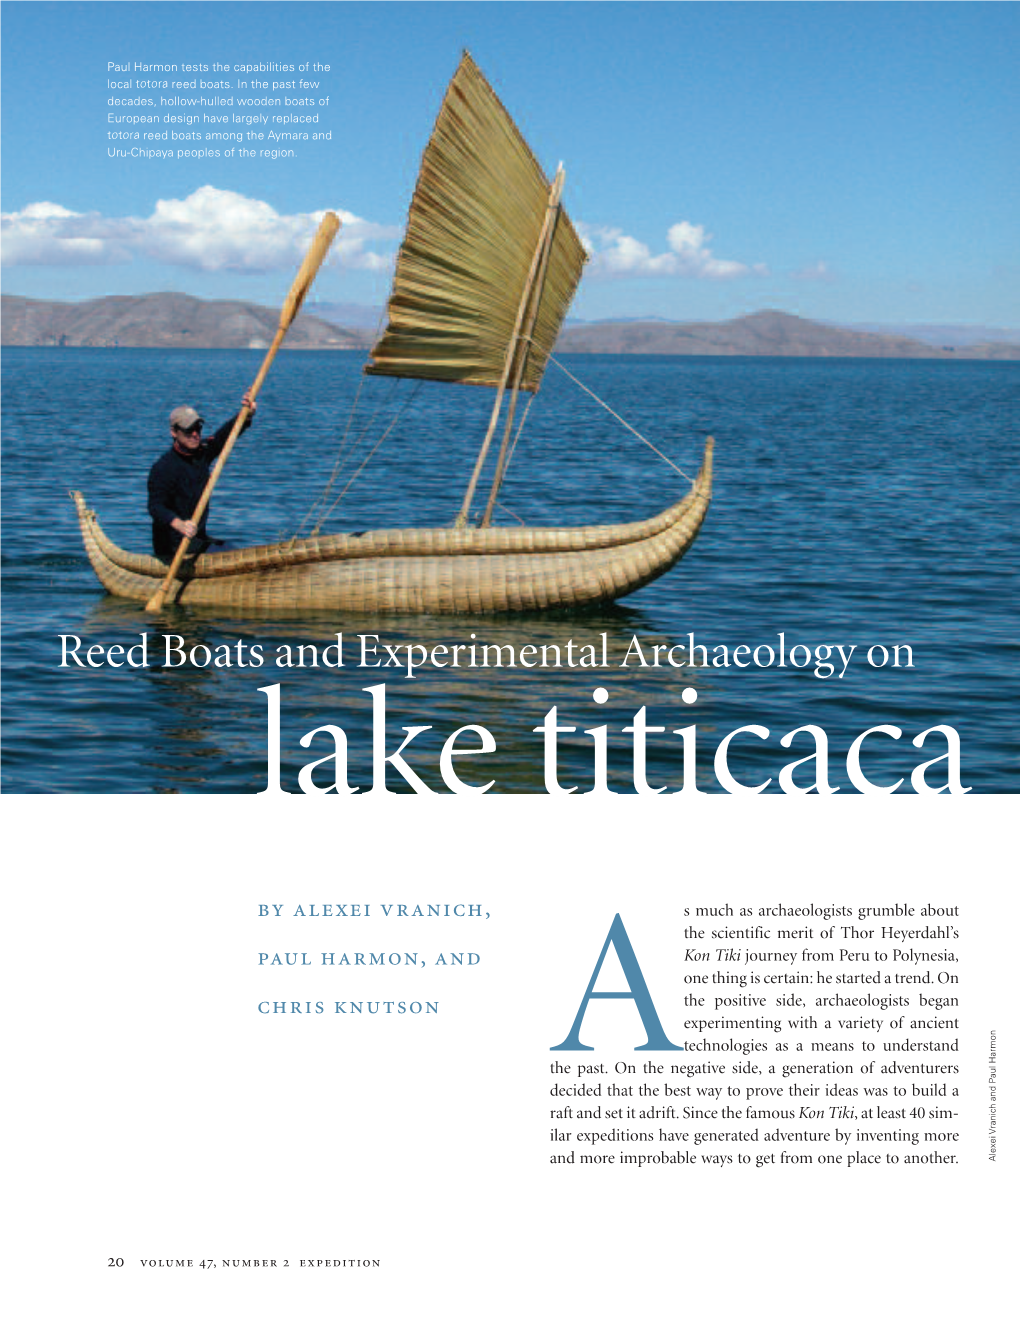 Reed Boats and Experimental Archaeology on Lake Titicaca